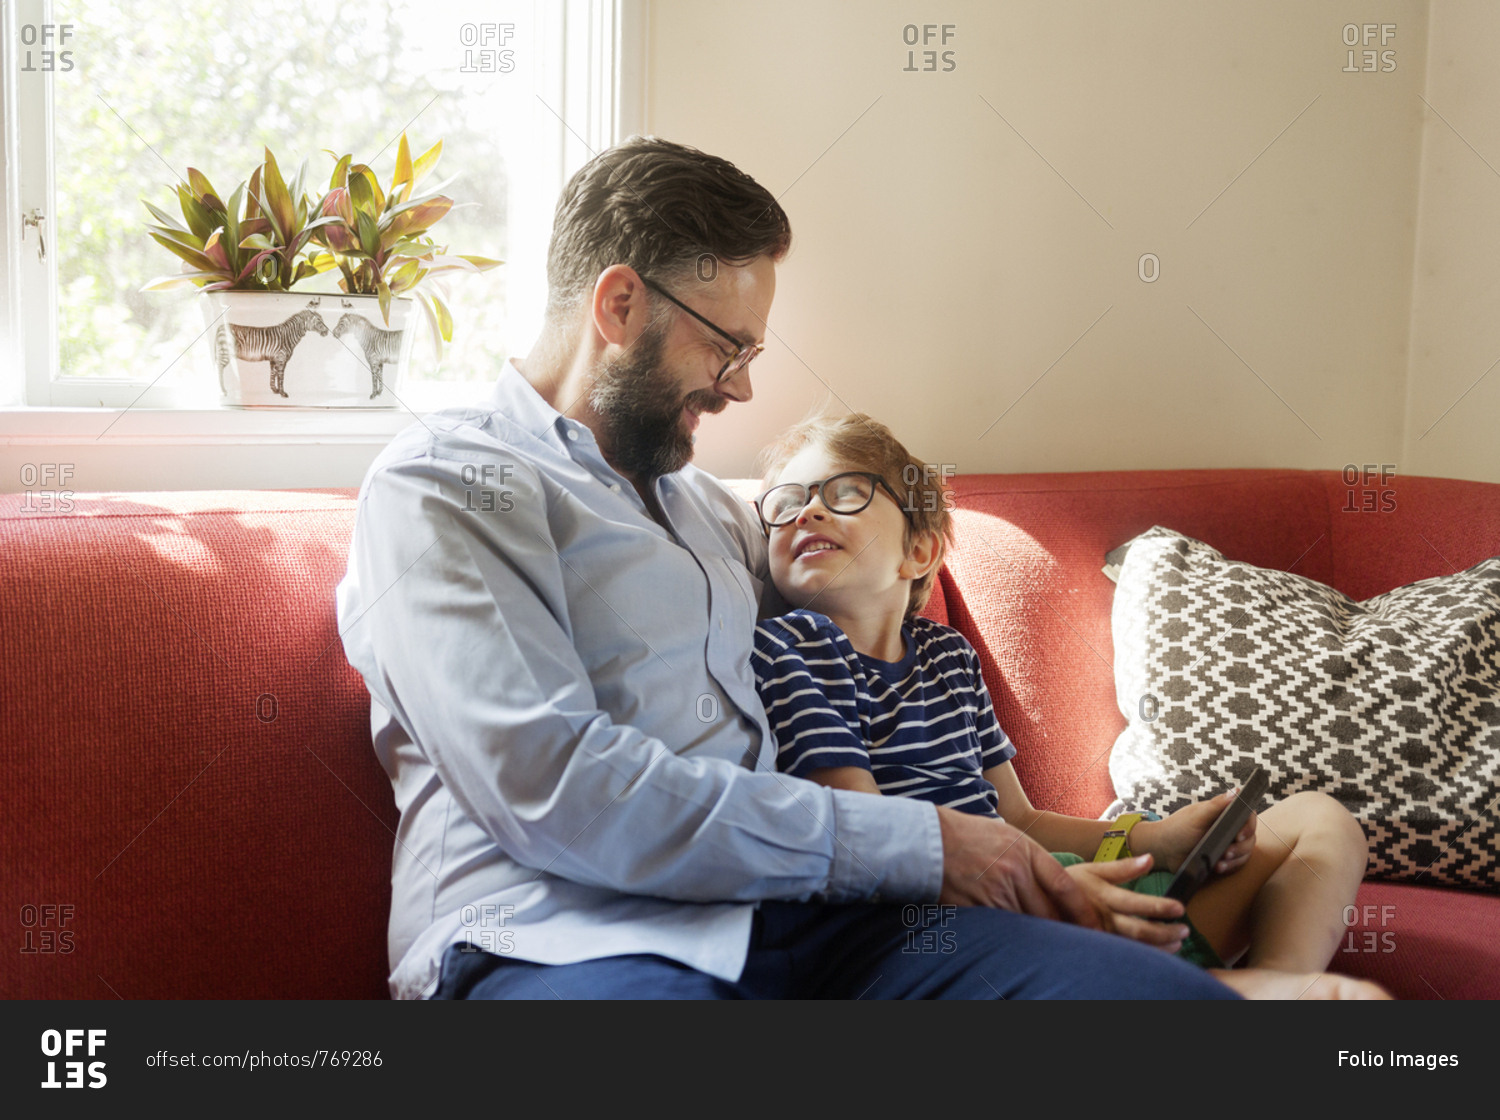 Mid Adult man and boy using a device in a living room in Sweden